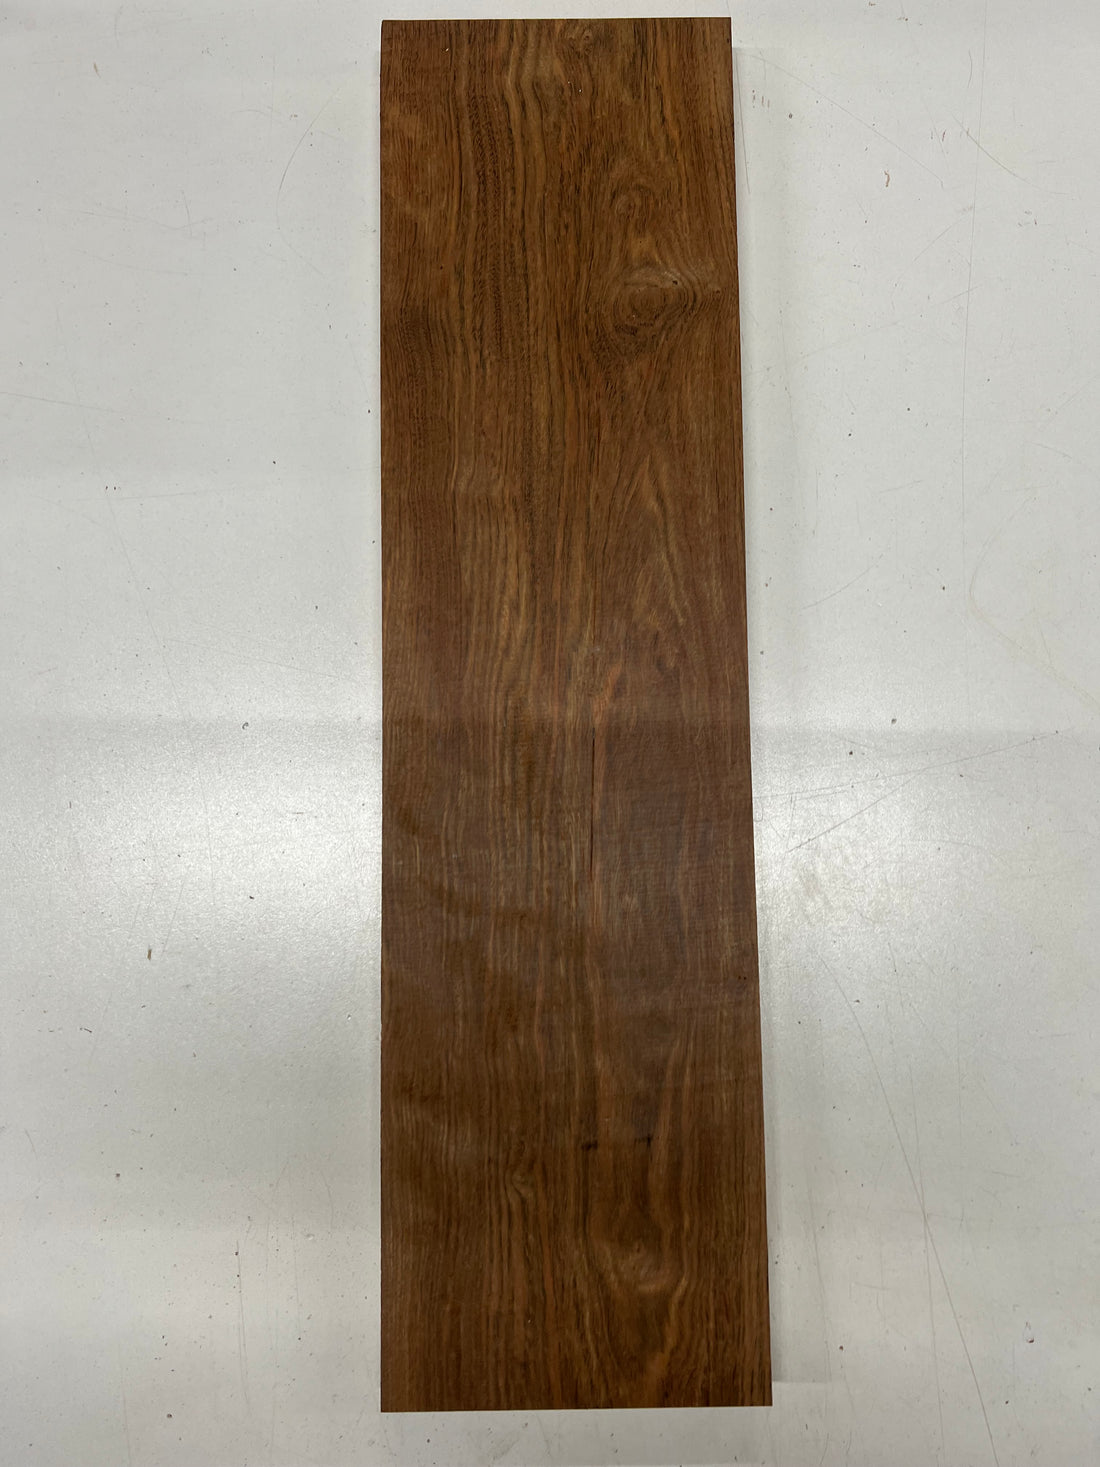 Chechen Lumber Board Wood Blank 21&quot;x 5-1/2&quot;x 3/4&quot; 